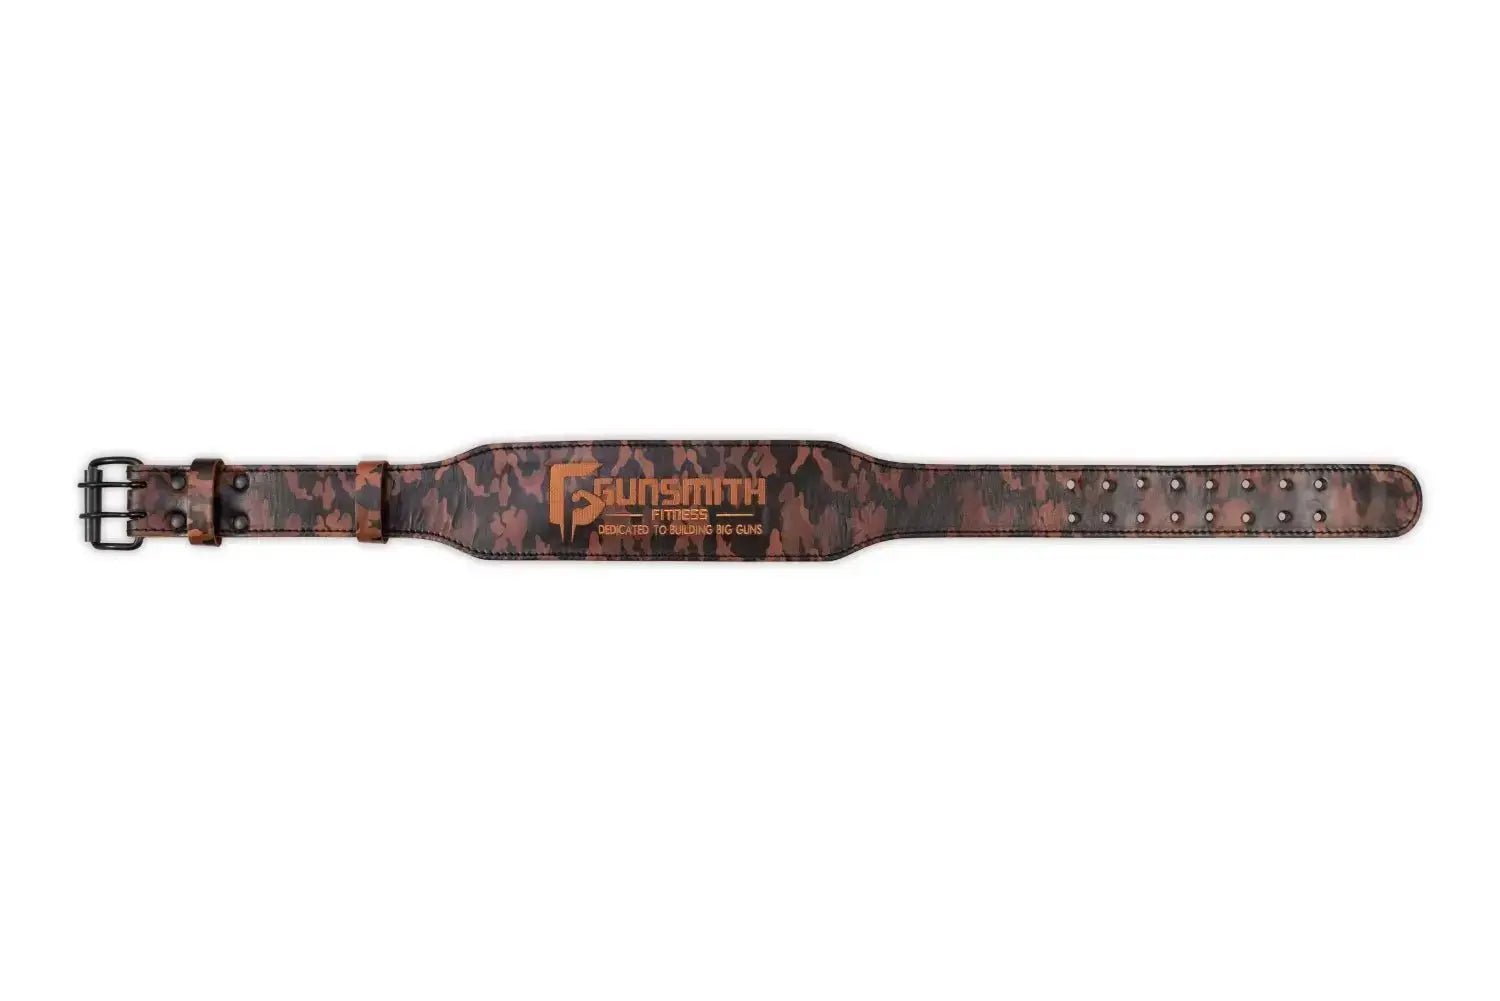 Clearance - Camo Apex 4 Inch Lifting Belt - Gunsmith Fitness